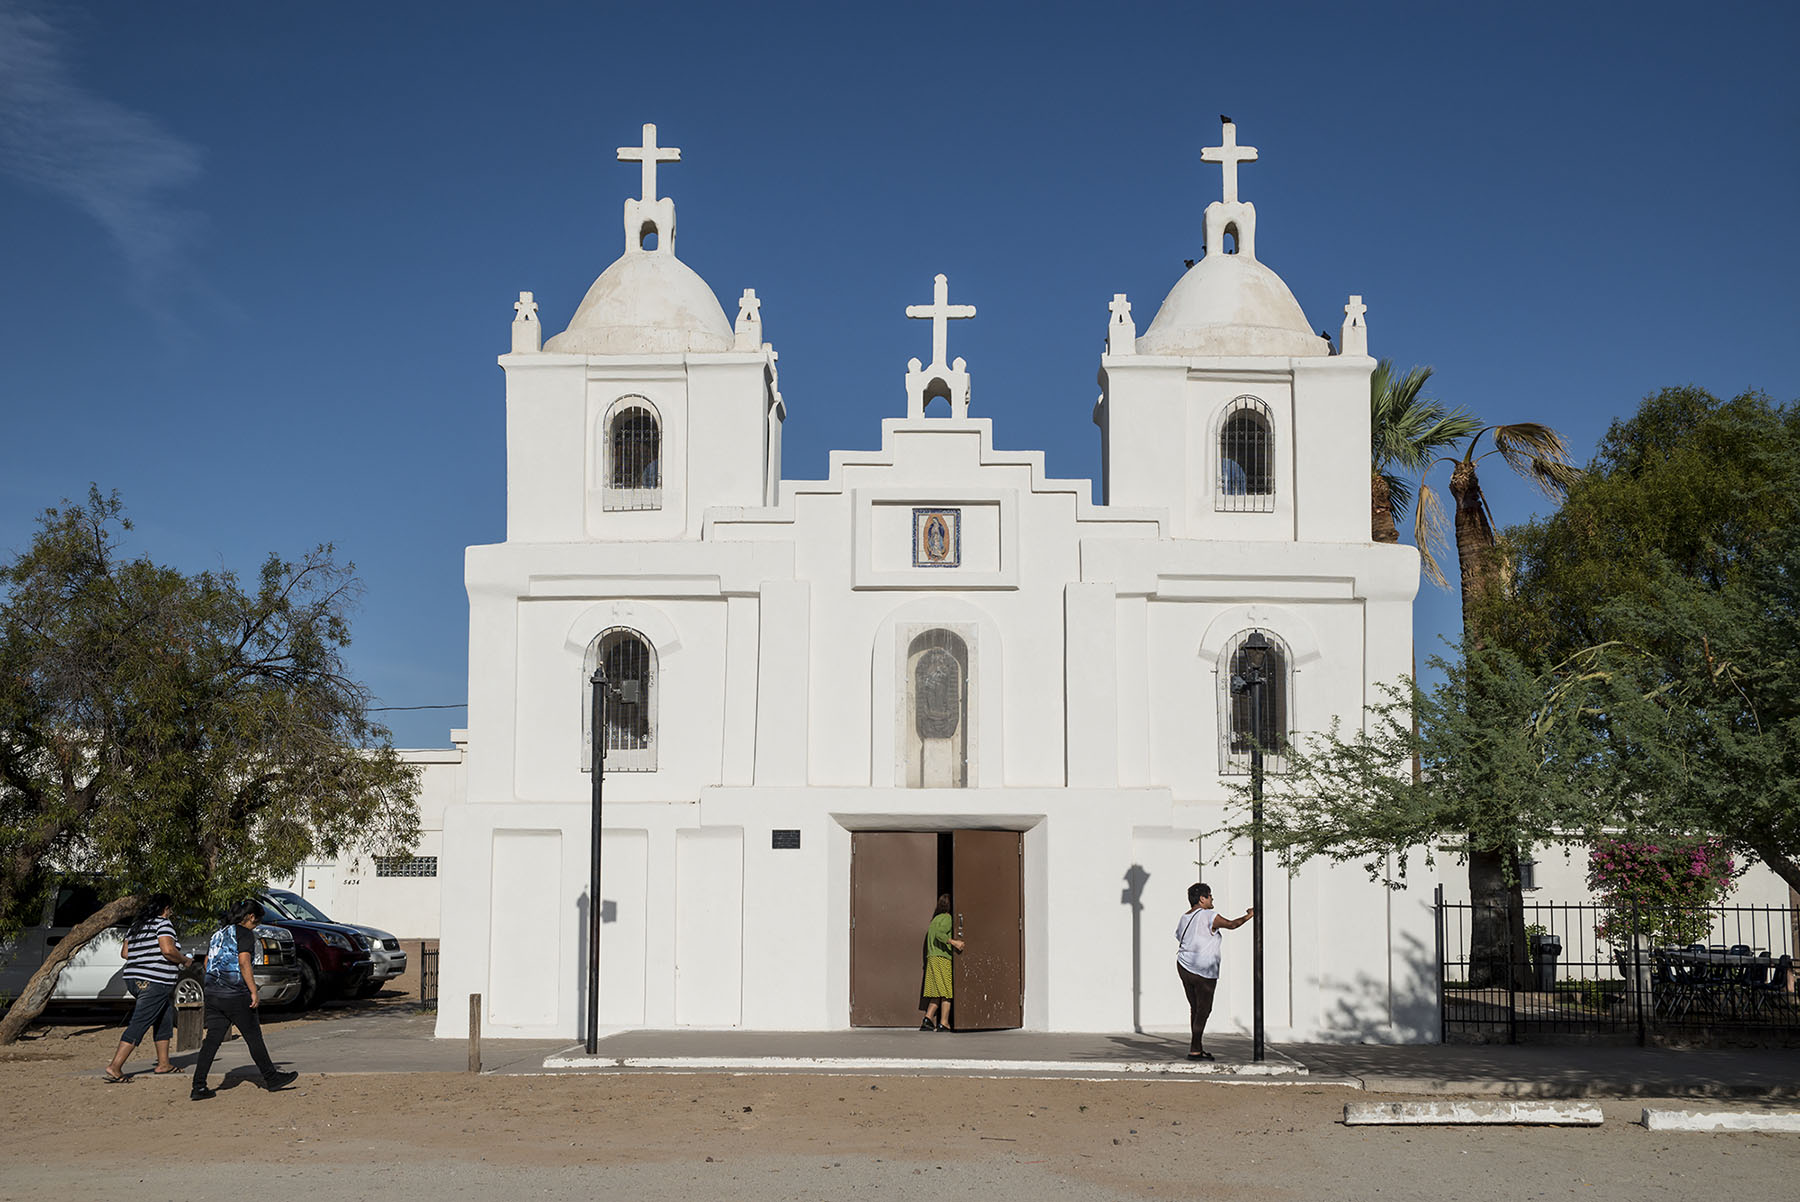 Guadalupe, Arizona, has a majority Latino population, and its Our Lady of Guadalupe Church draws Latinos from nearby towns who say it reminds them of churches in Mexico. (Roman Knertser/News21)